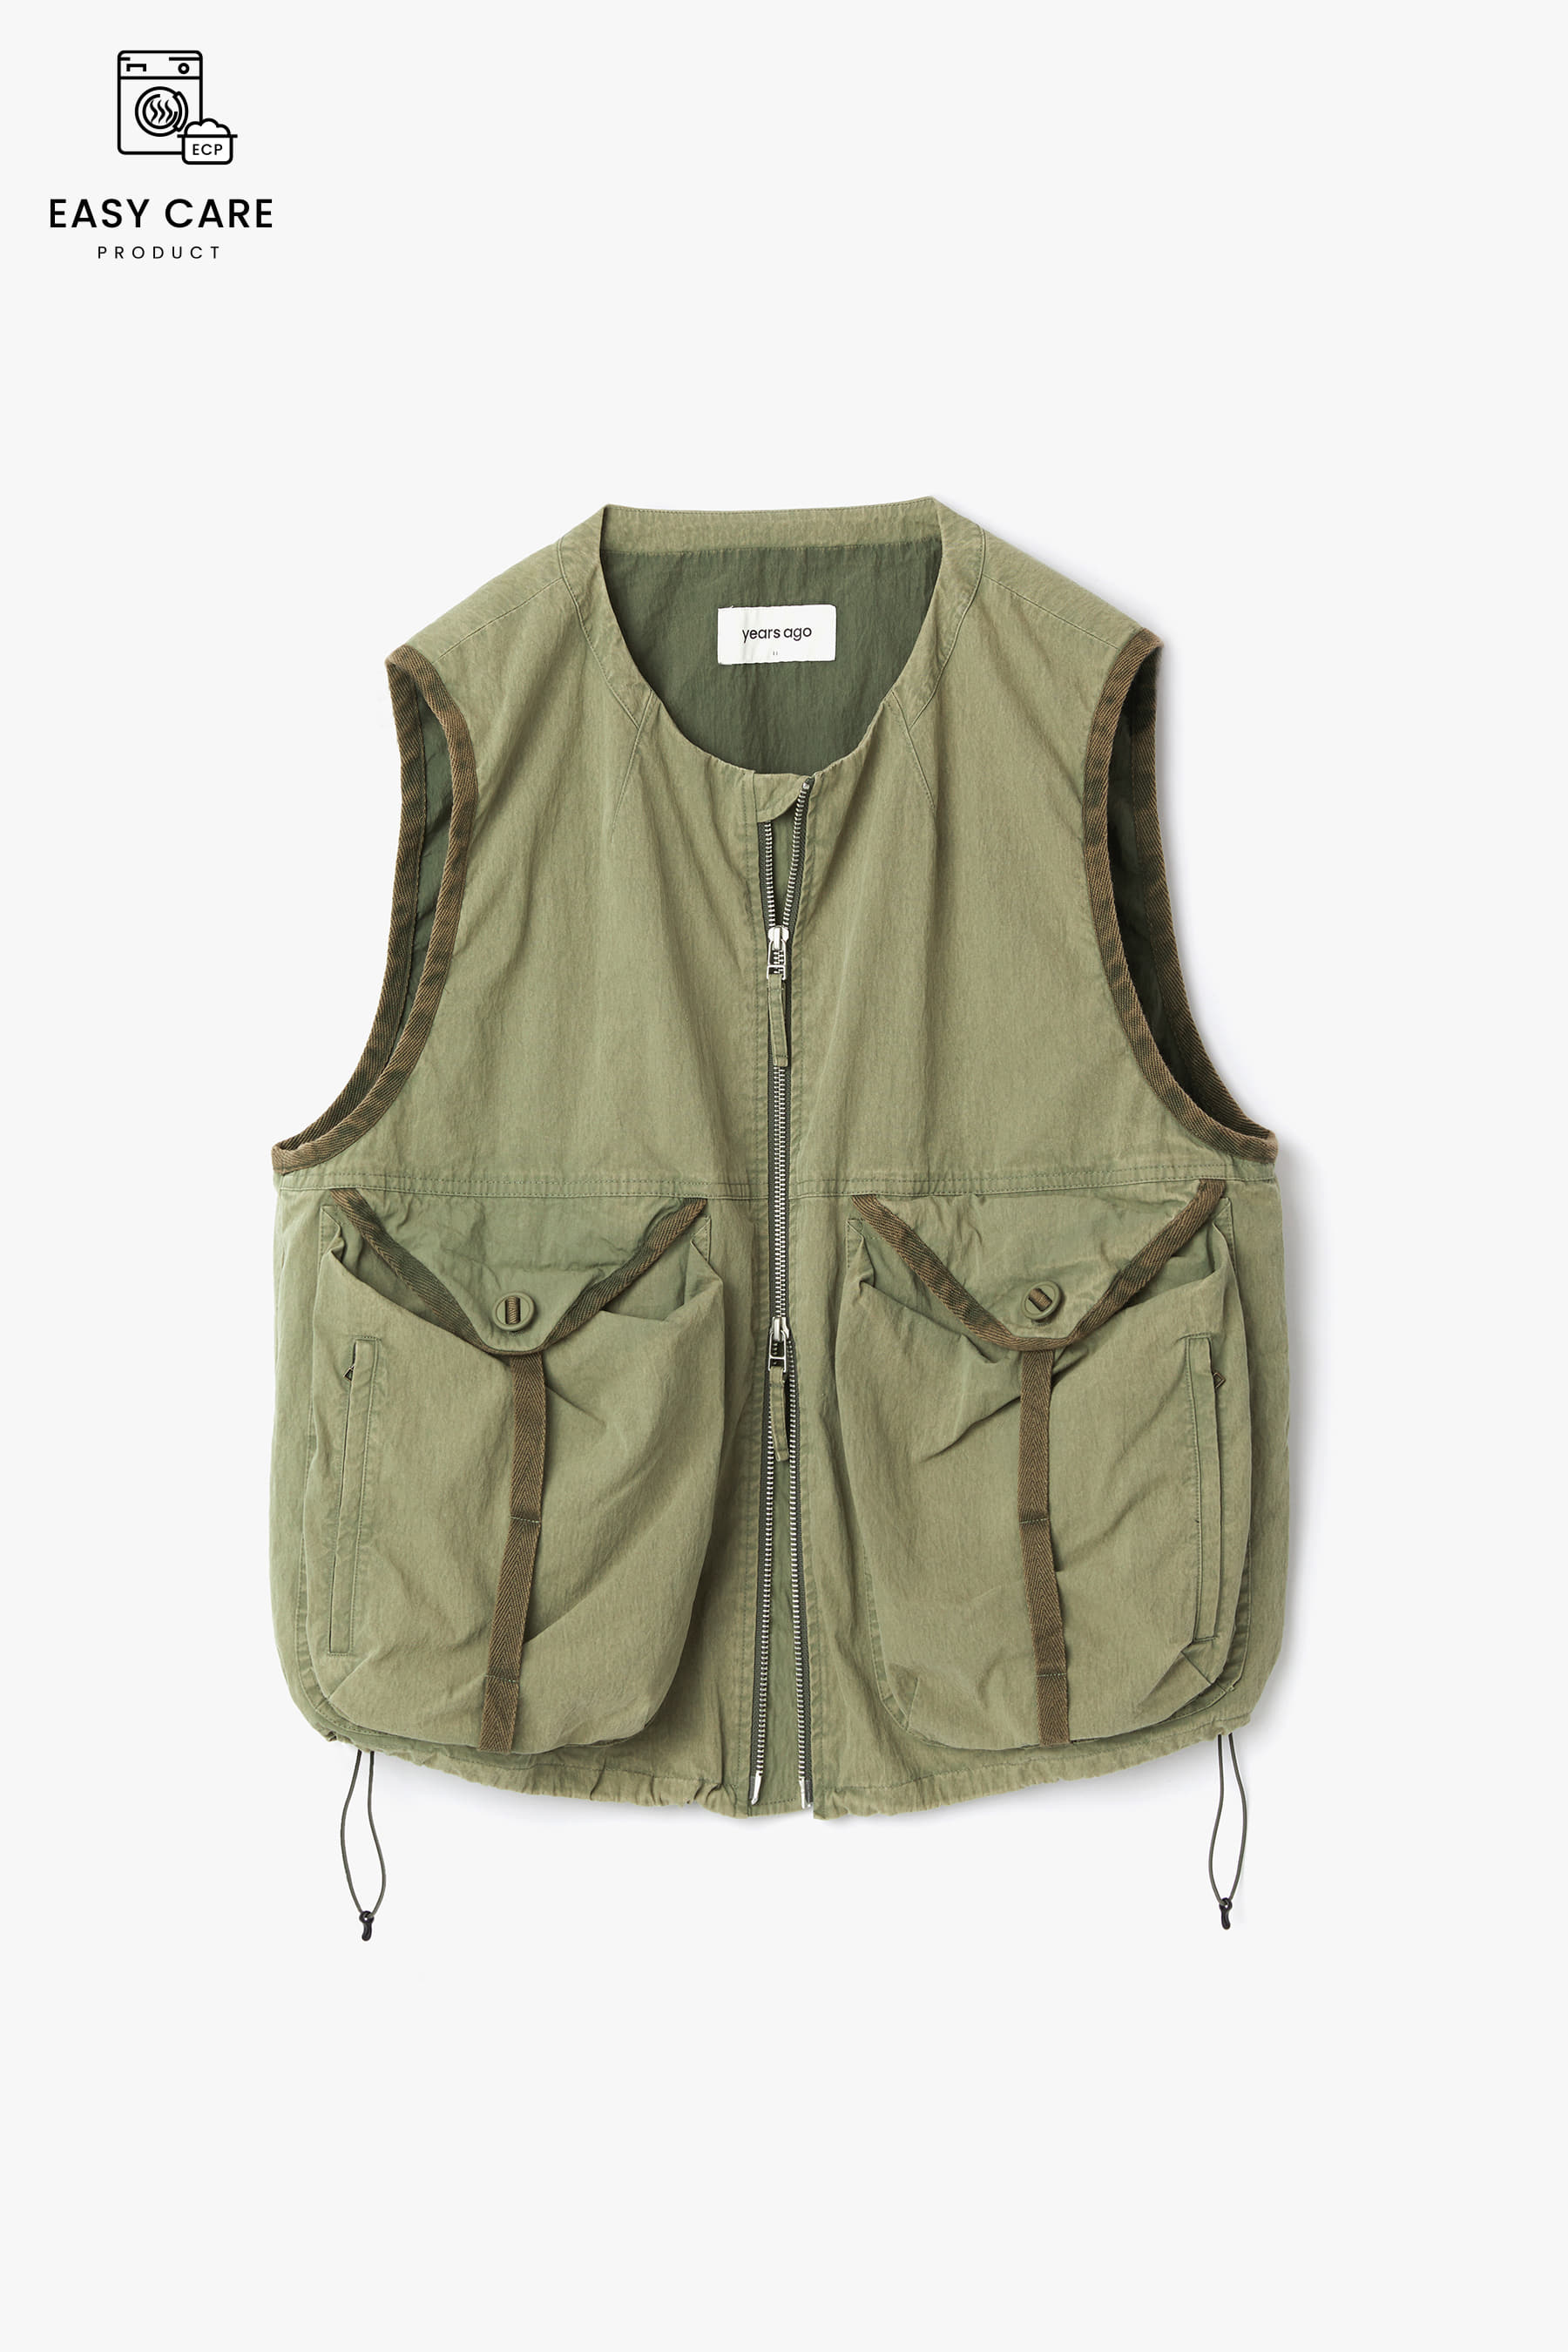 DUSTY OLIVE OLD WASHED TACTICAL VEST (ECP GARMENT PROCESS)